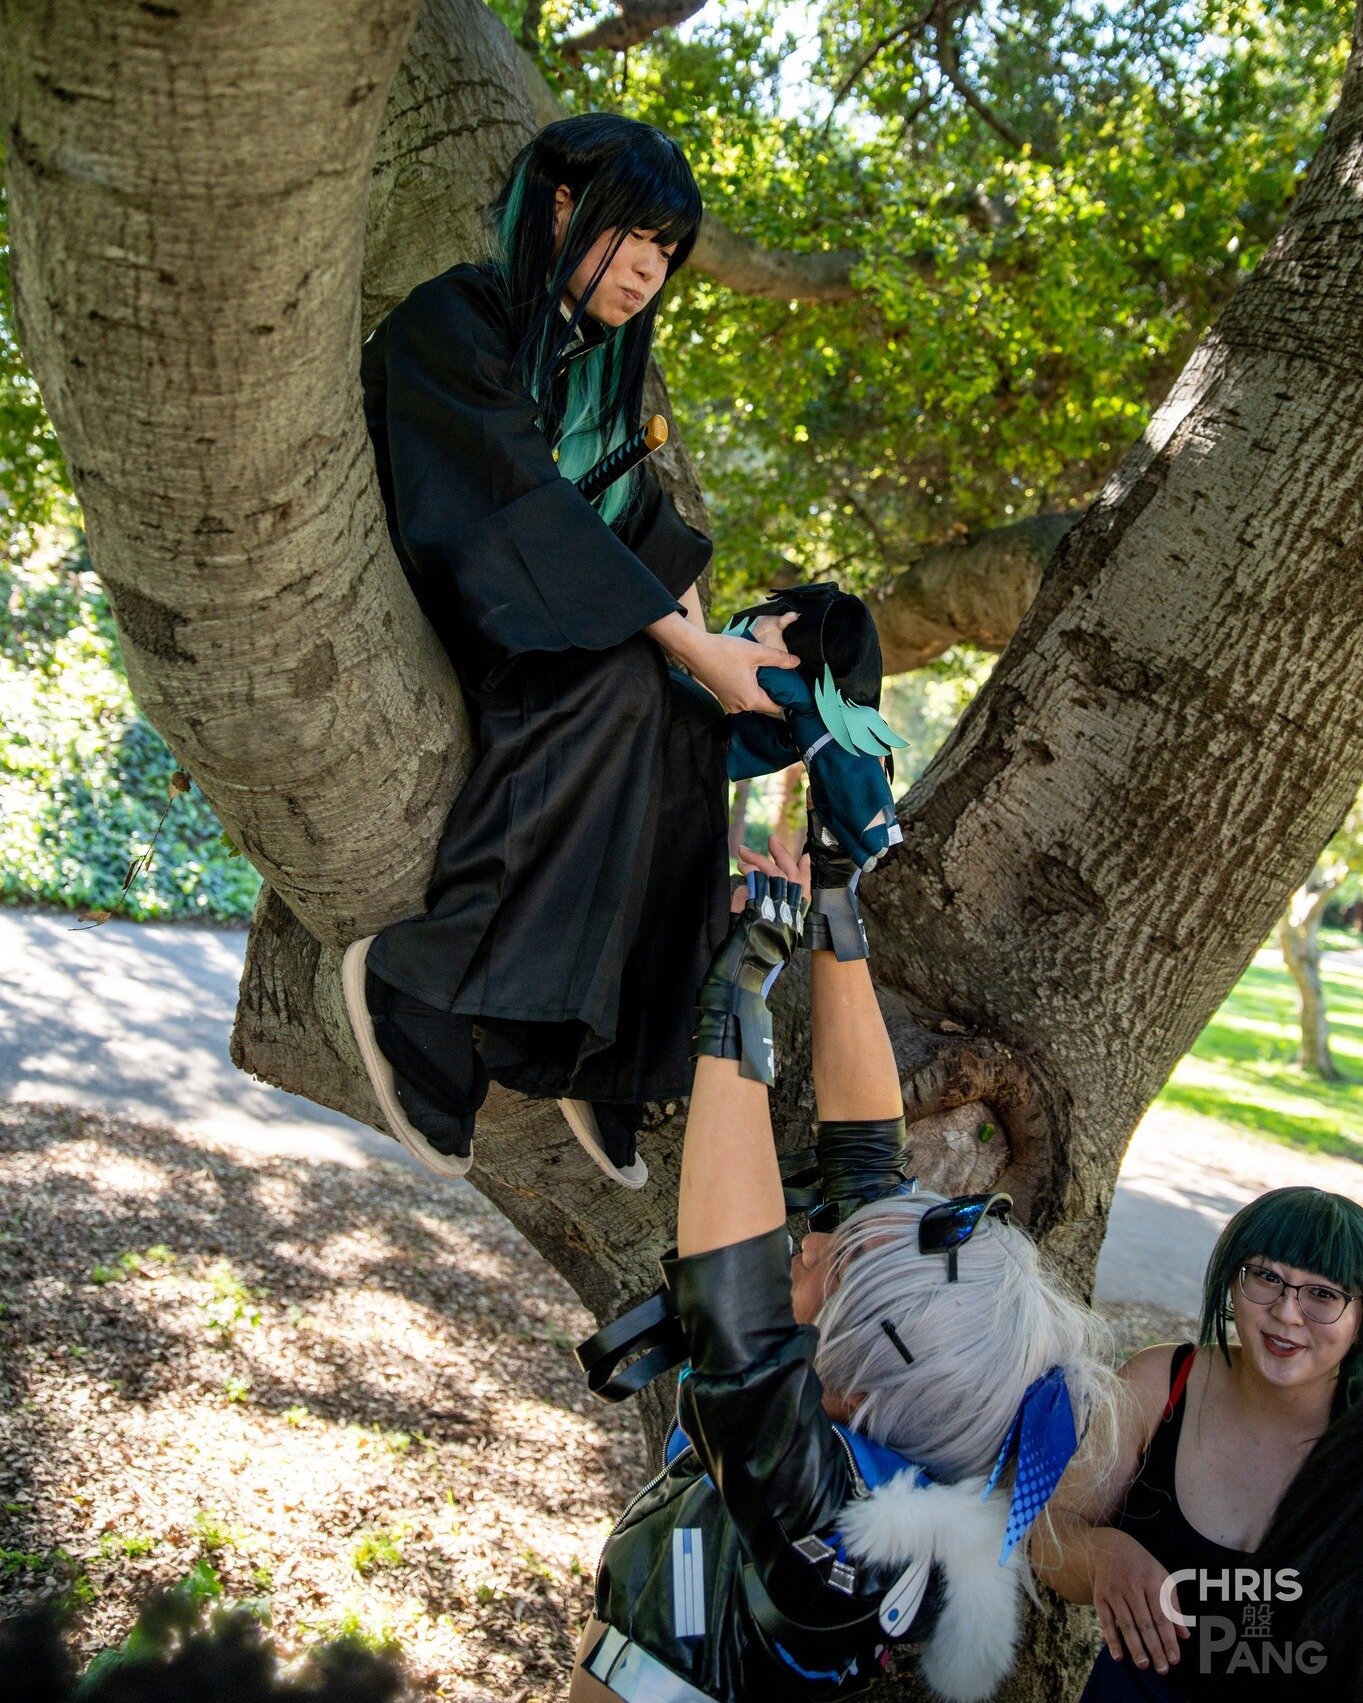 It's dangerous to climb alone, so take the plushie...
#Muichiro: @froppyblah 
#SilverWolf: @prisarisma 

Photos from the NorCal Spring Gathering are now complete. You can find them on FB or my site: https://chrispang-productions.com/2024/norcal-sprin